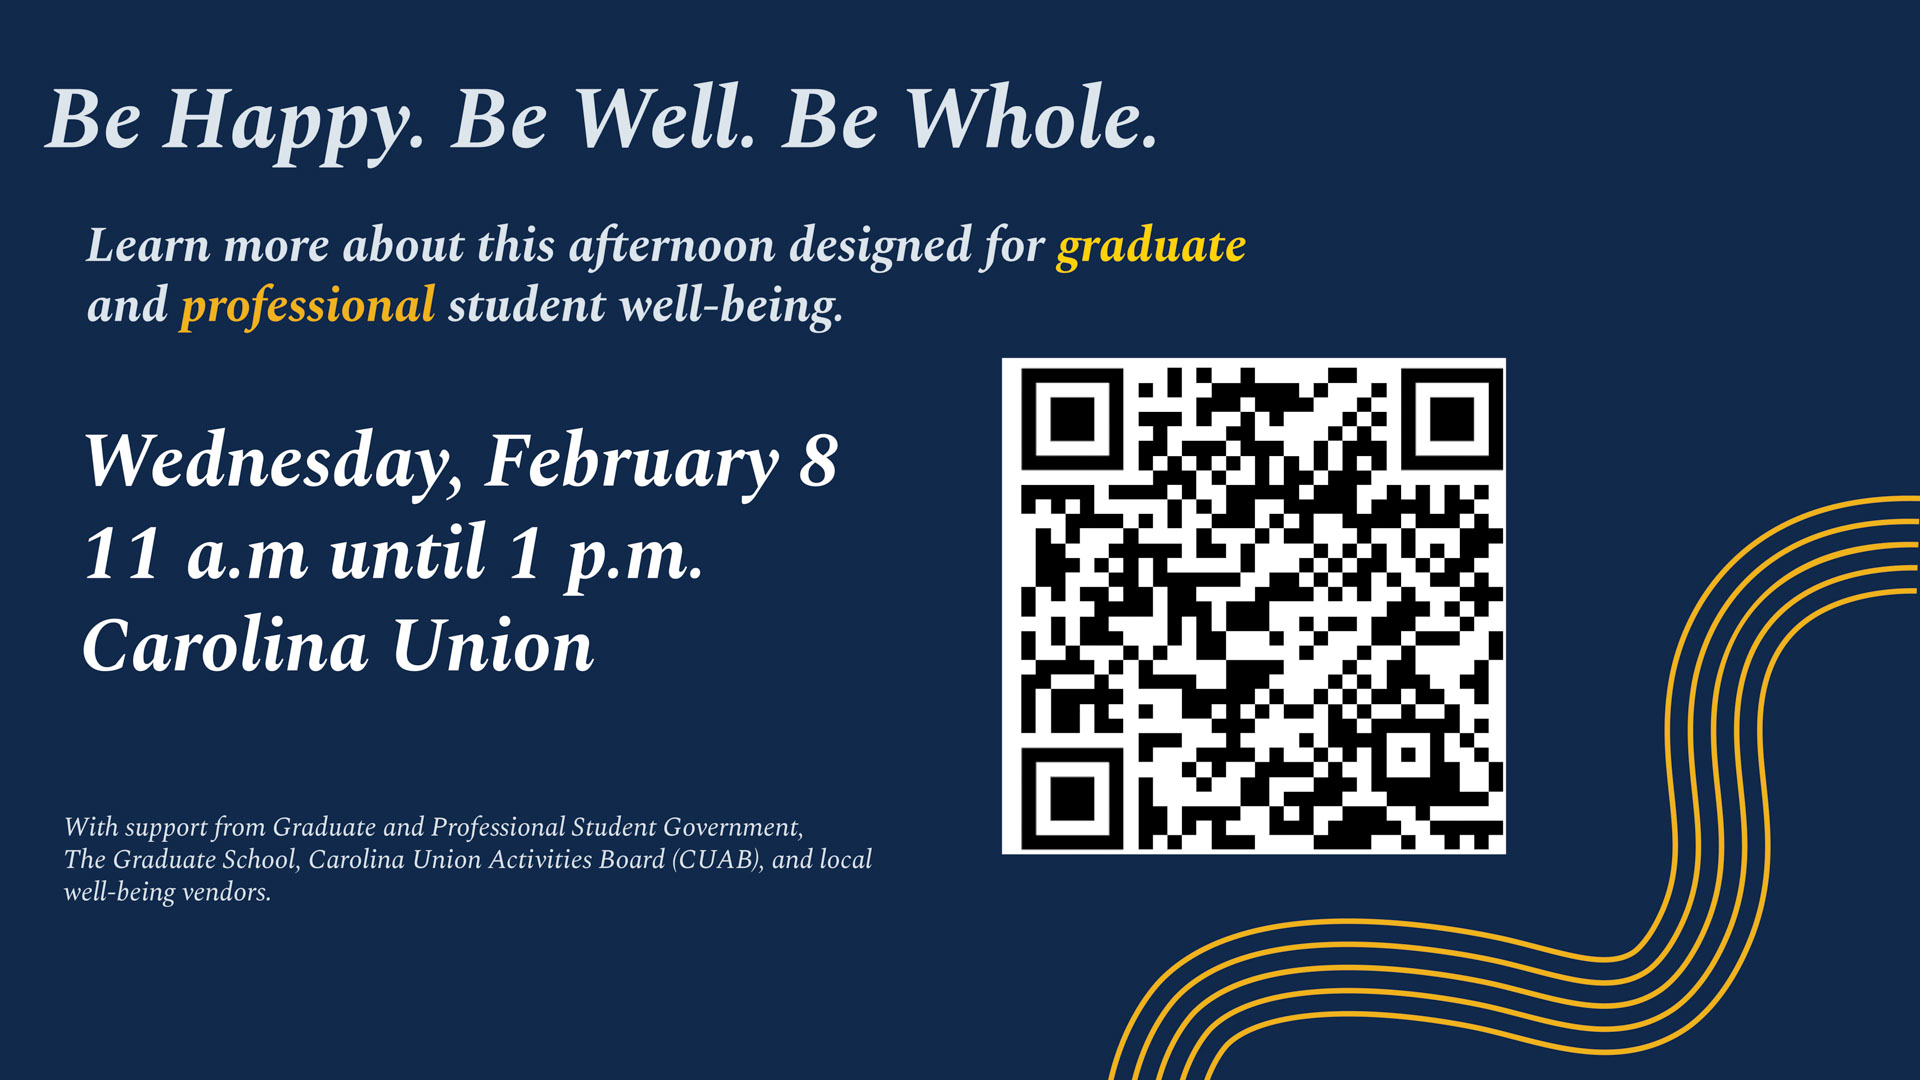 Be Happy. Be Weill. Be Whole. Learn more about this event designed for graduate and professional student wellbeing. Weds, Feb 8 11 am - 1 pm Carolina Union